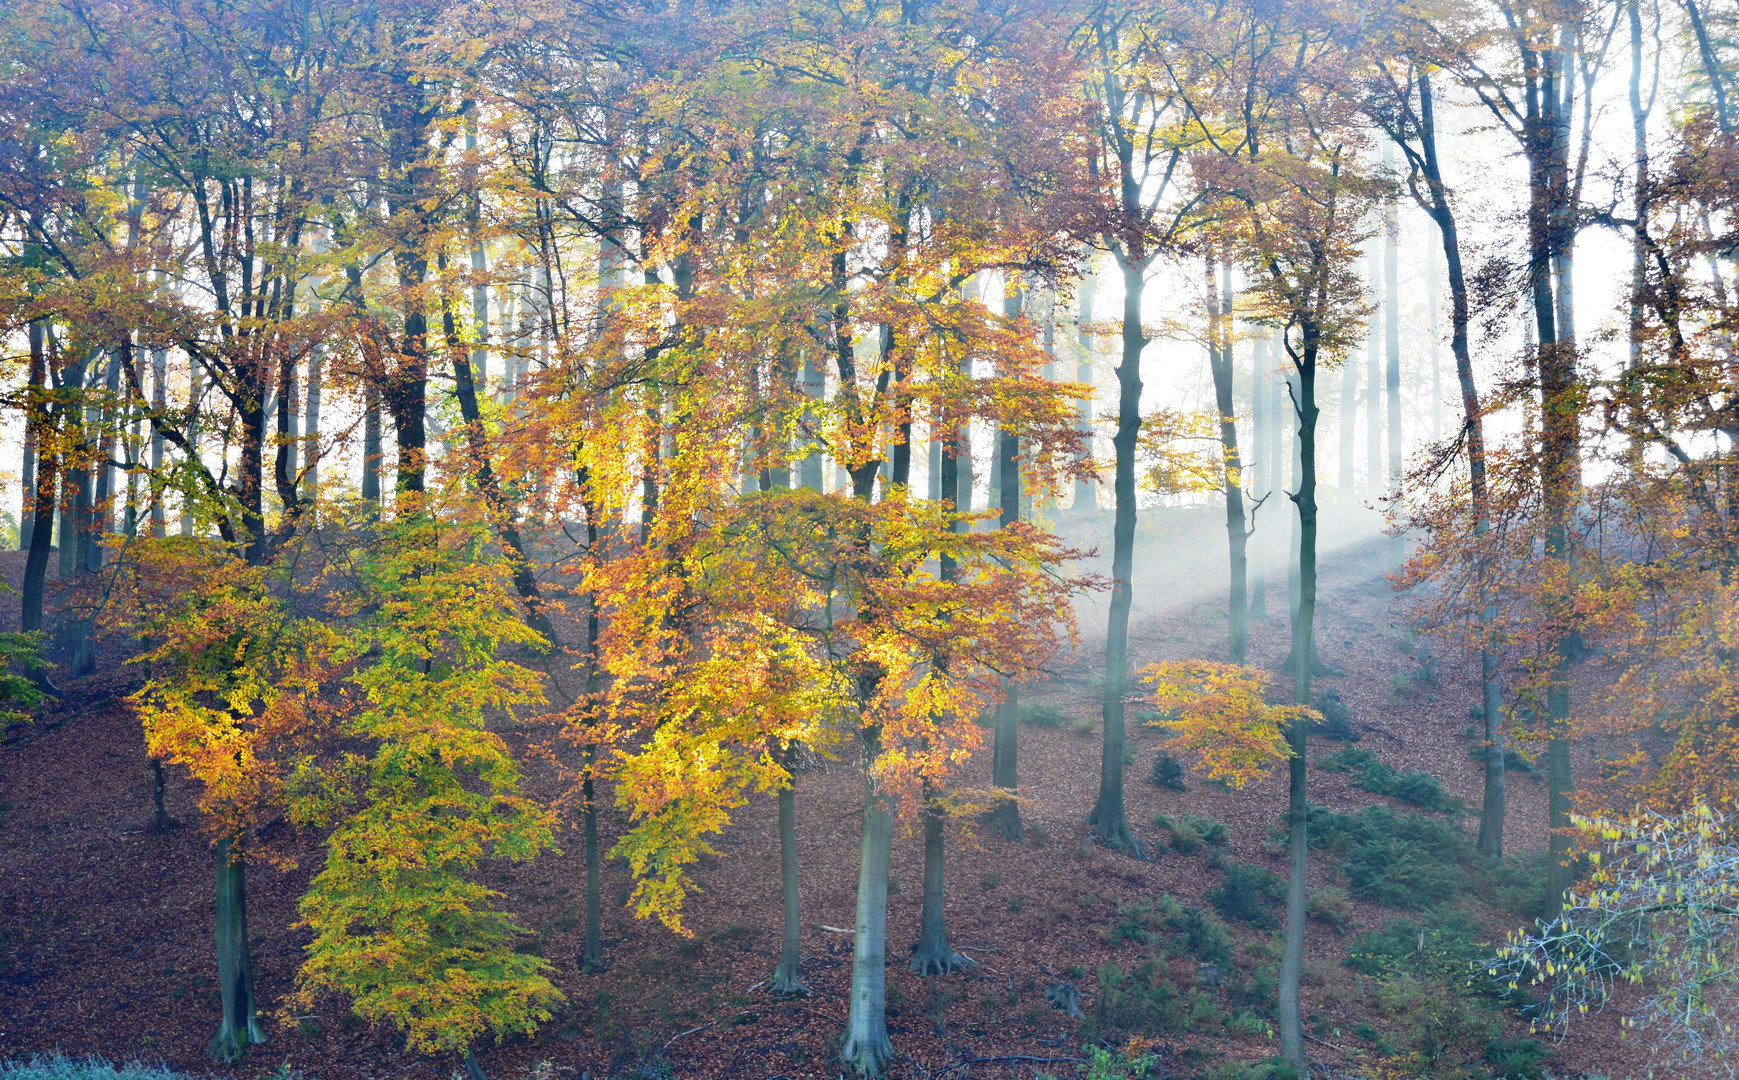 kalter Herbstmorgen / cold morning in autumn